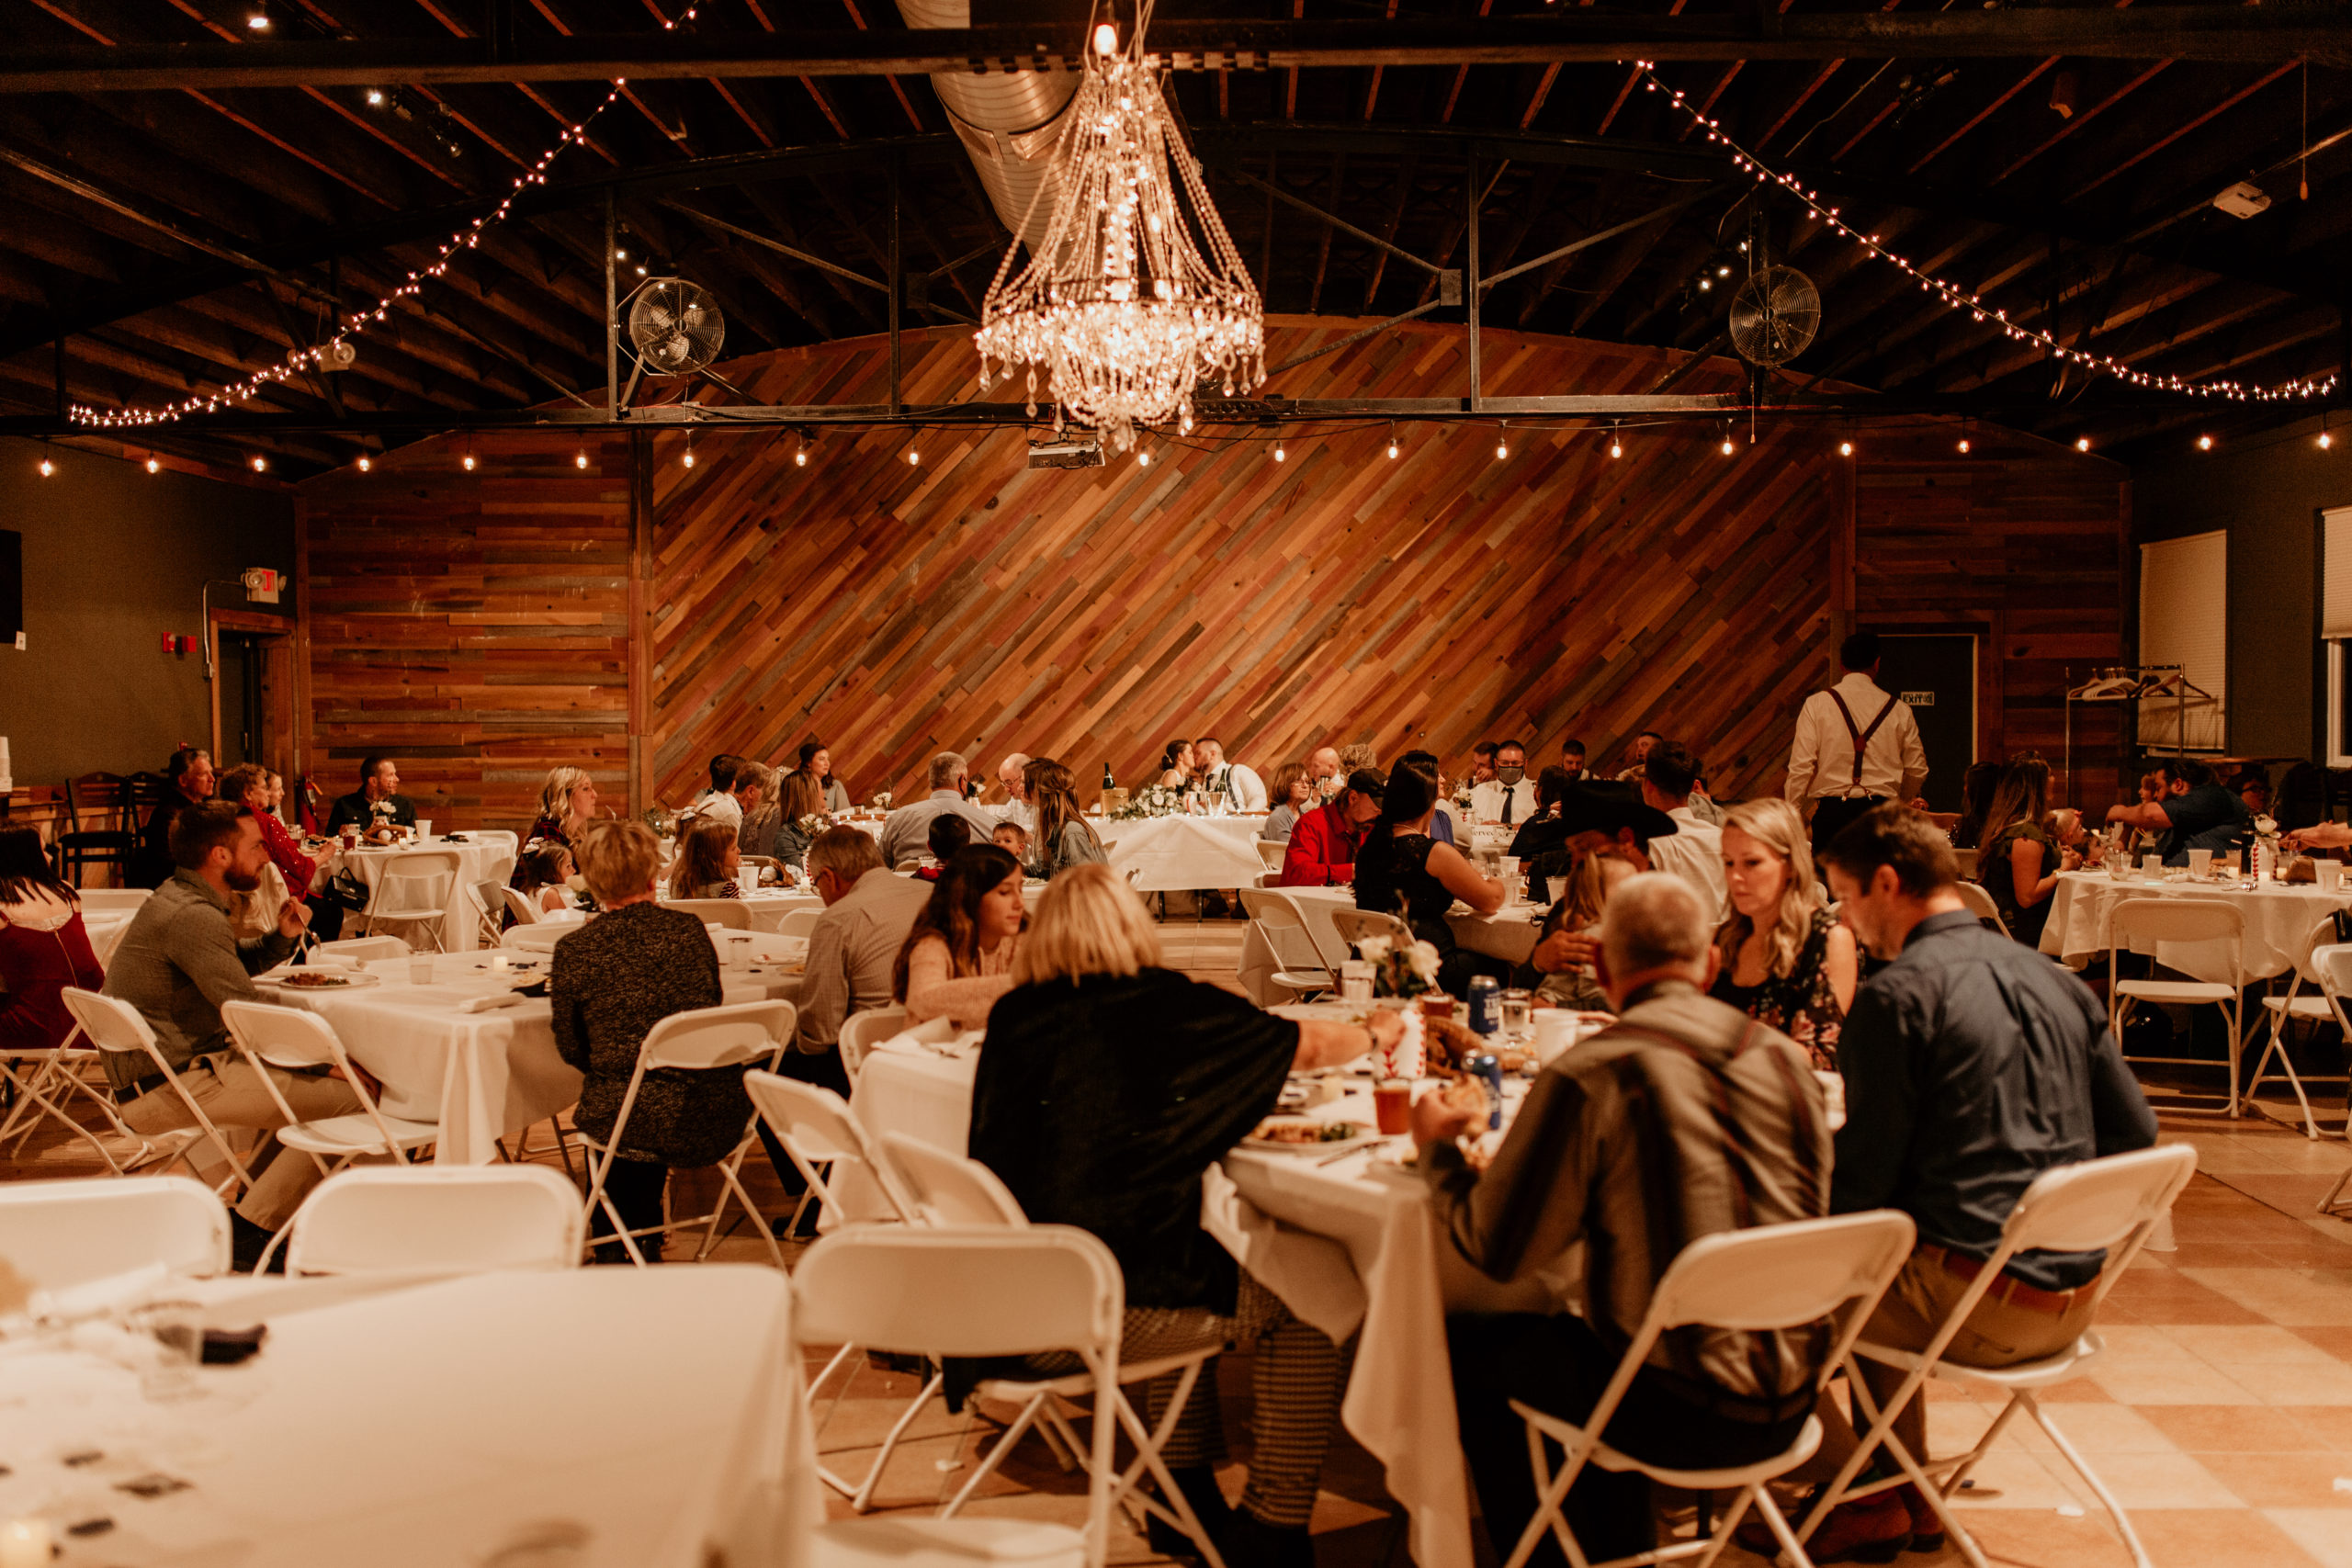 large wedding reception venue with wooden, plank walls and a large chandelier in the center of the room with string lights hung around